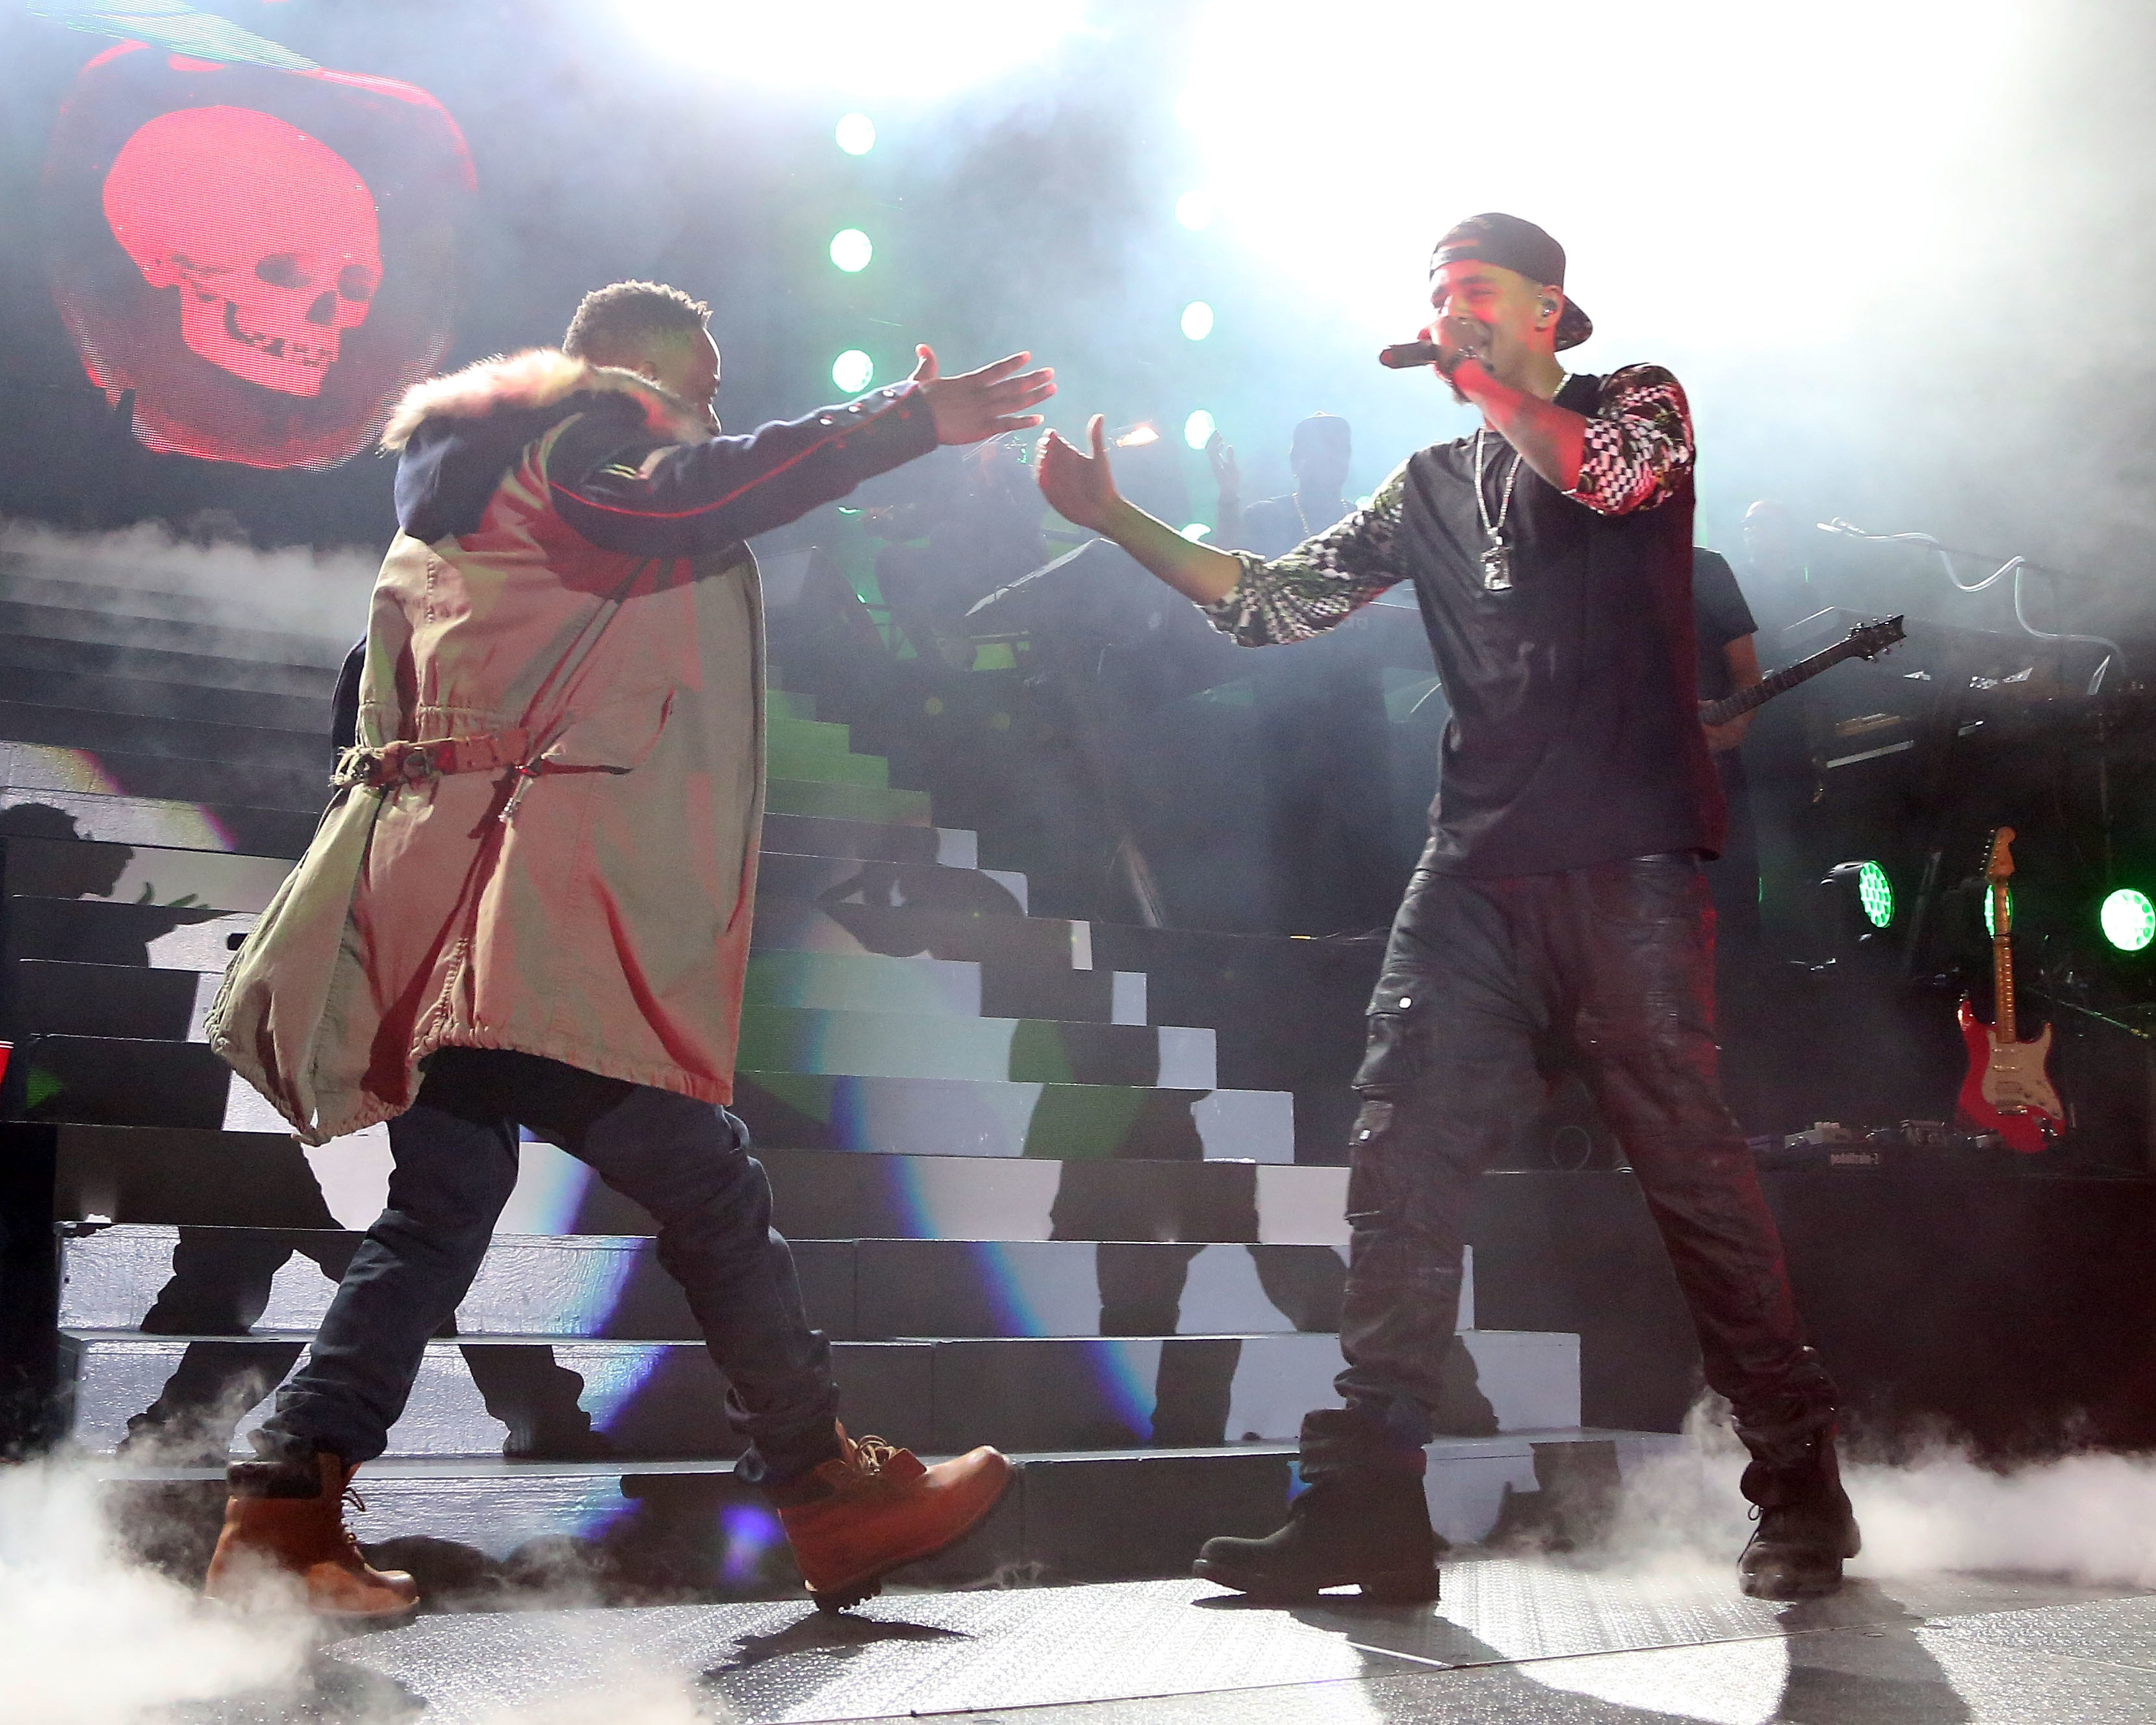 Two musicians on stage, one reaching out to the other, both in casual performance attire with graphic elements, amid stage fog and lights